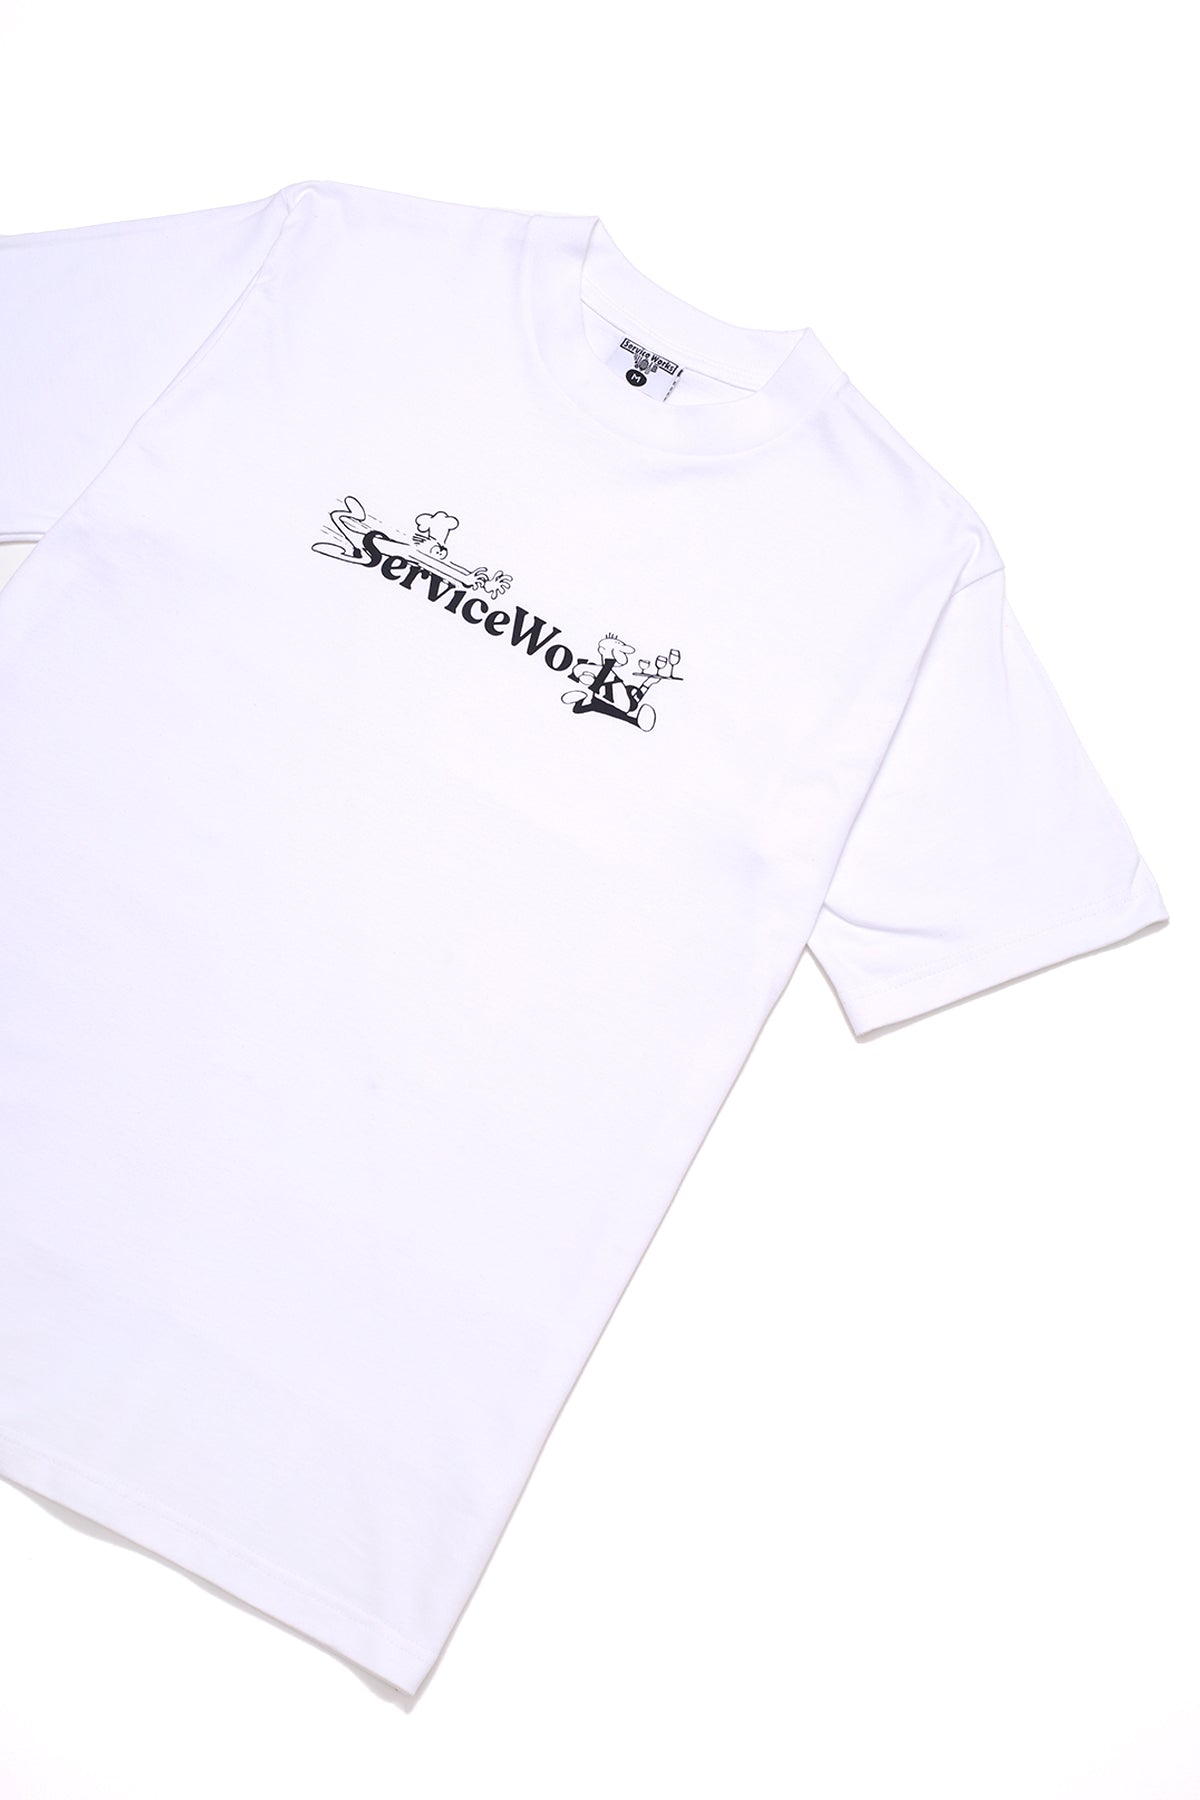 Service Chase Tee - White